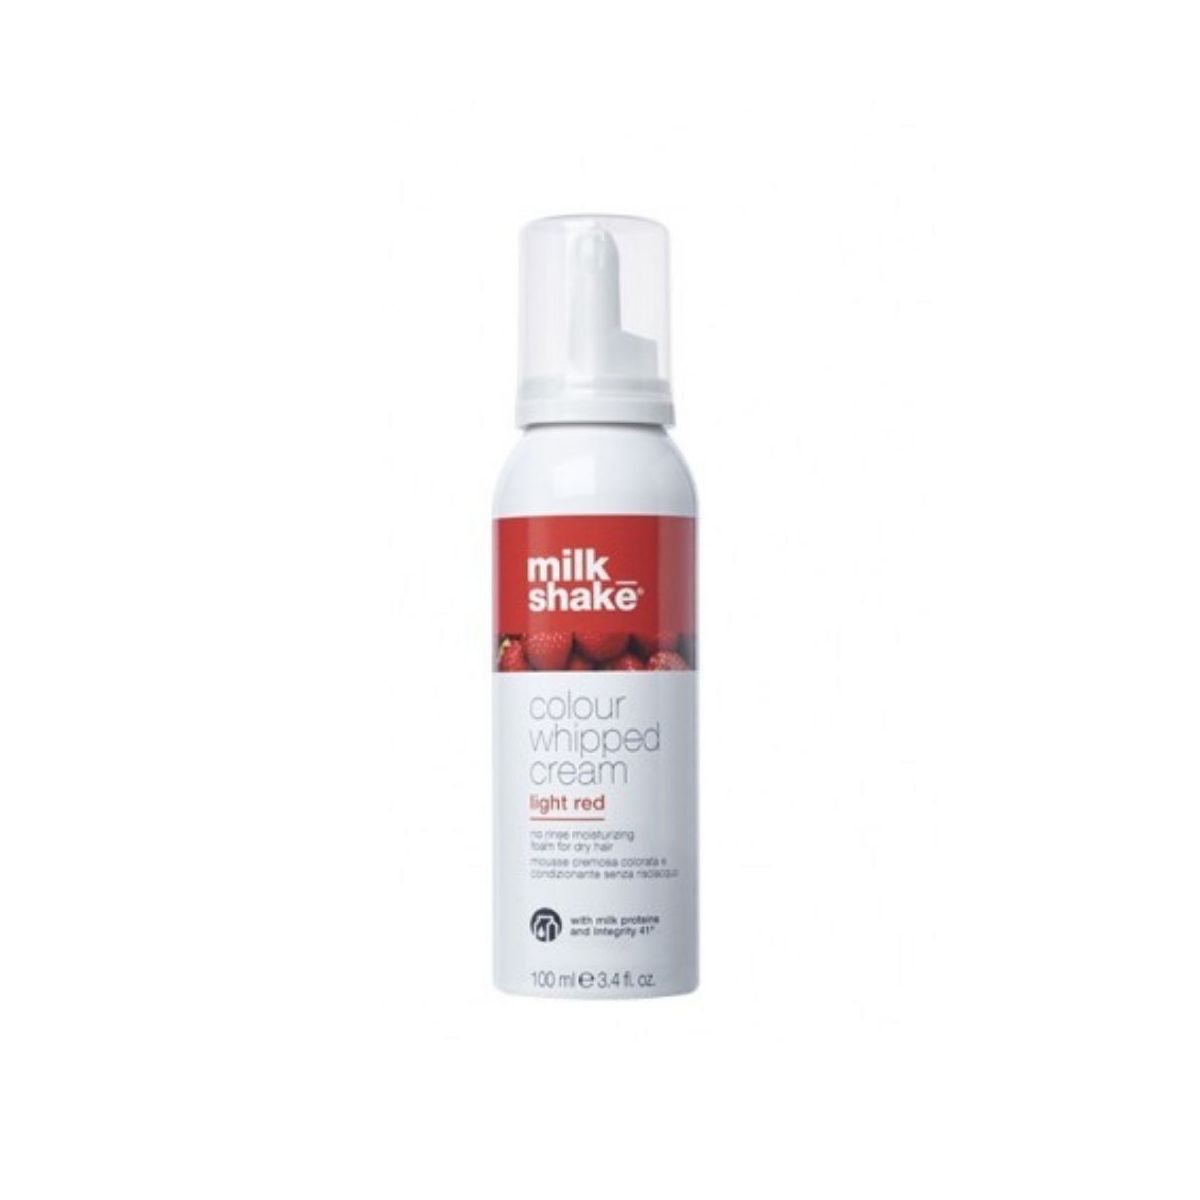 MILK SHAKE - COLOUR WHIPPED CREAM - Light Red (100ml) Mousse cremosa colorata